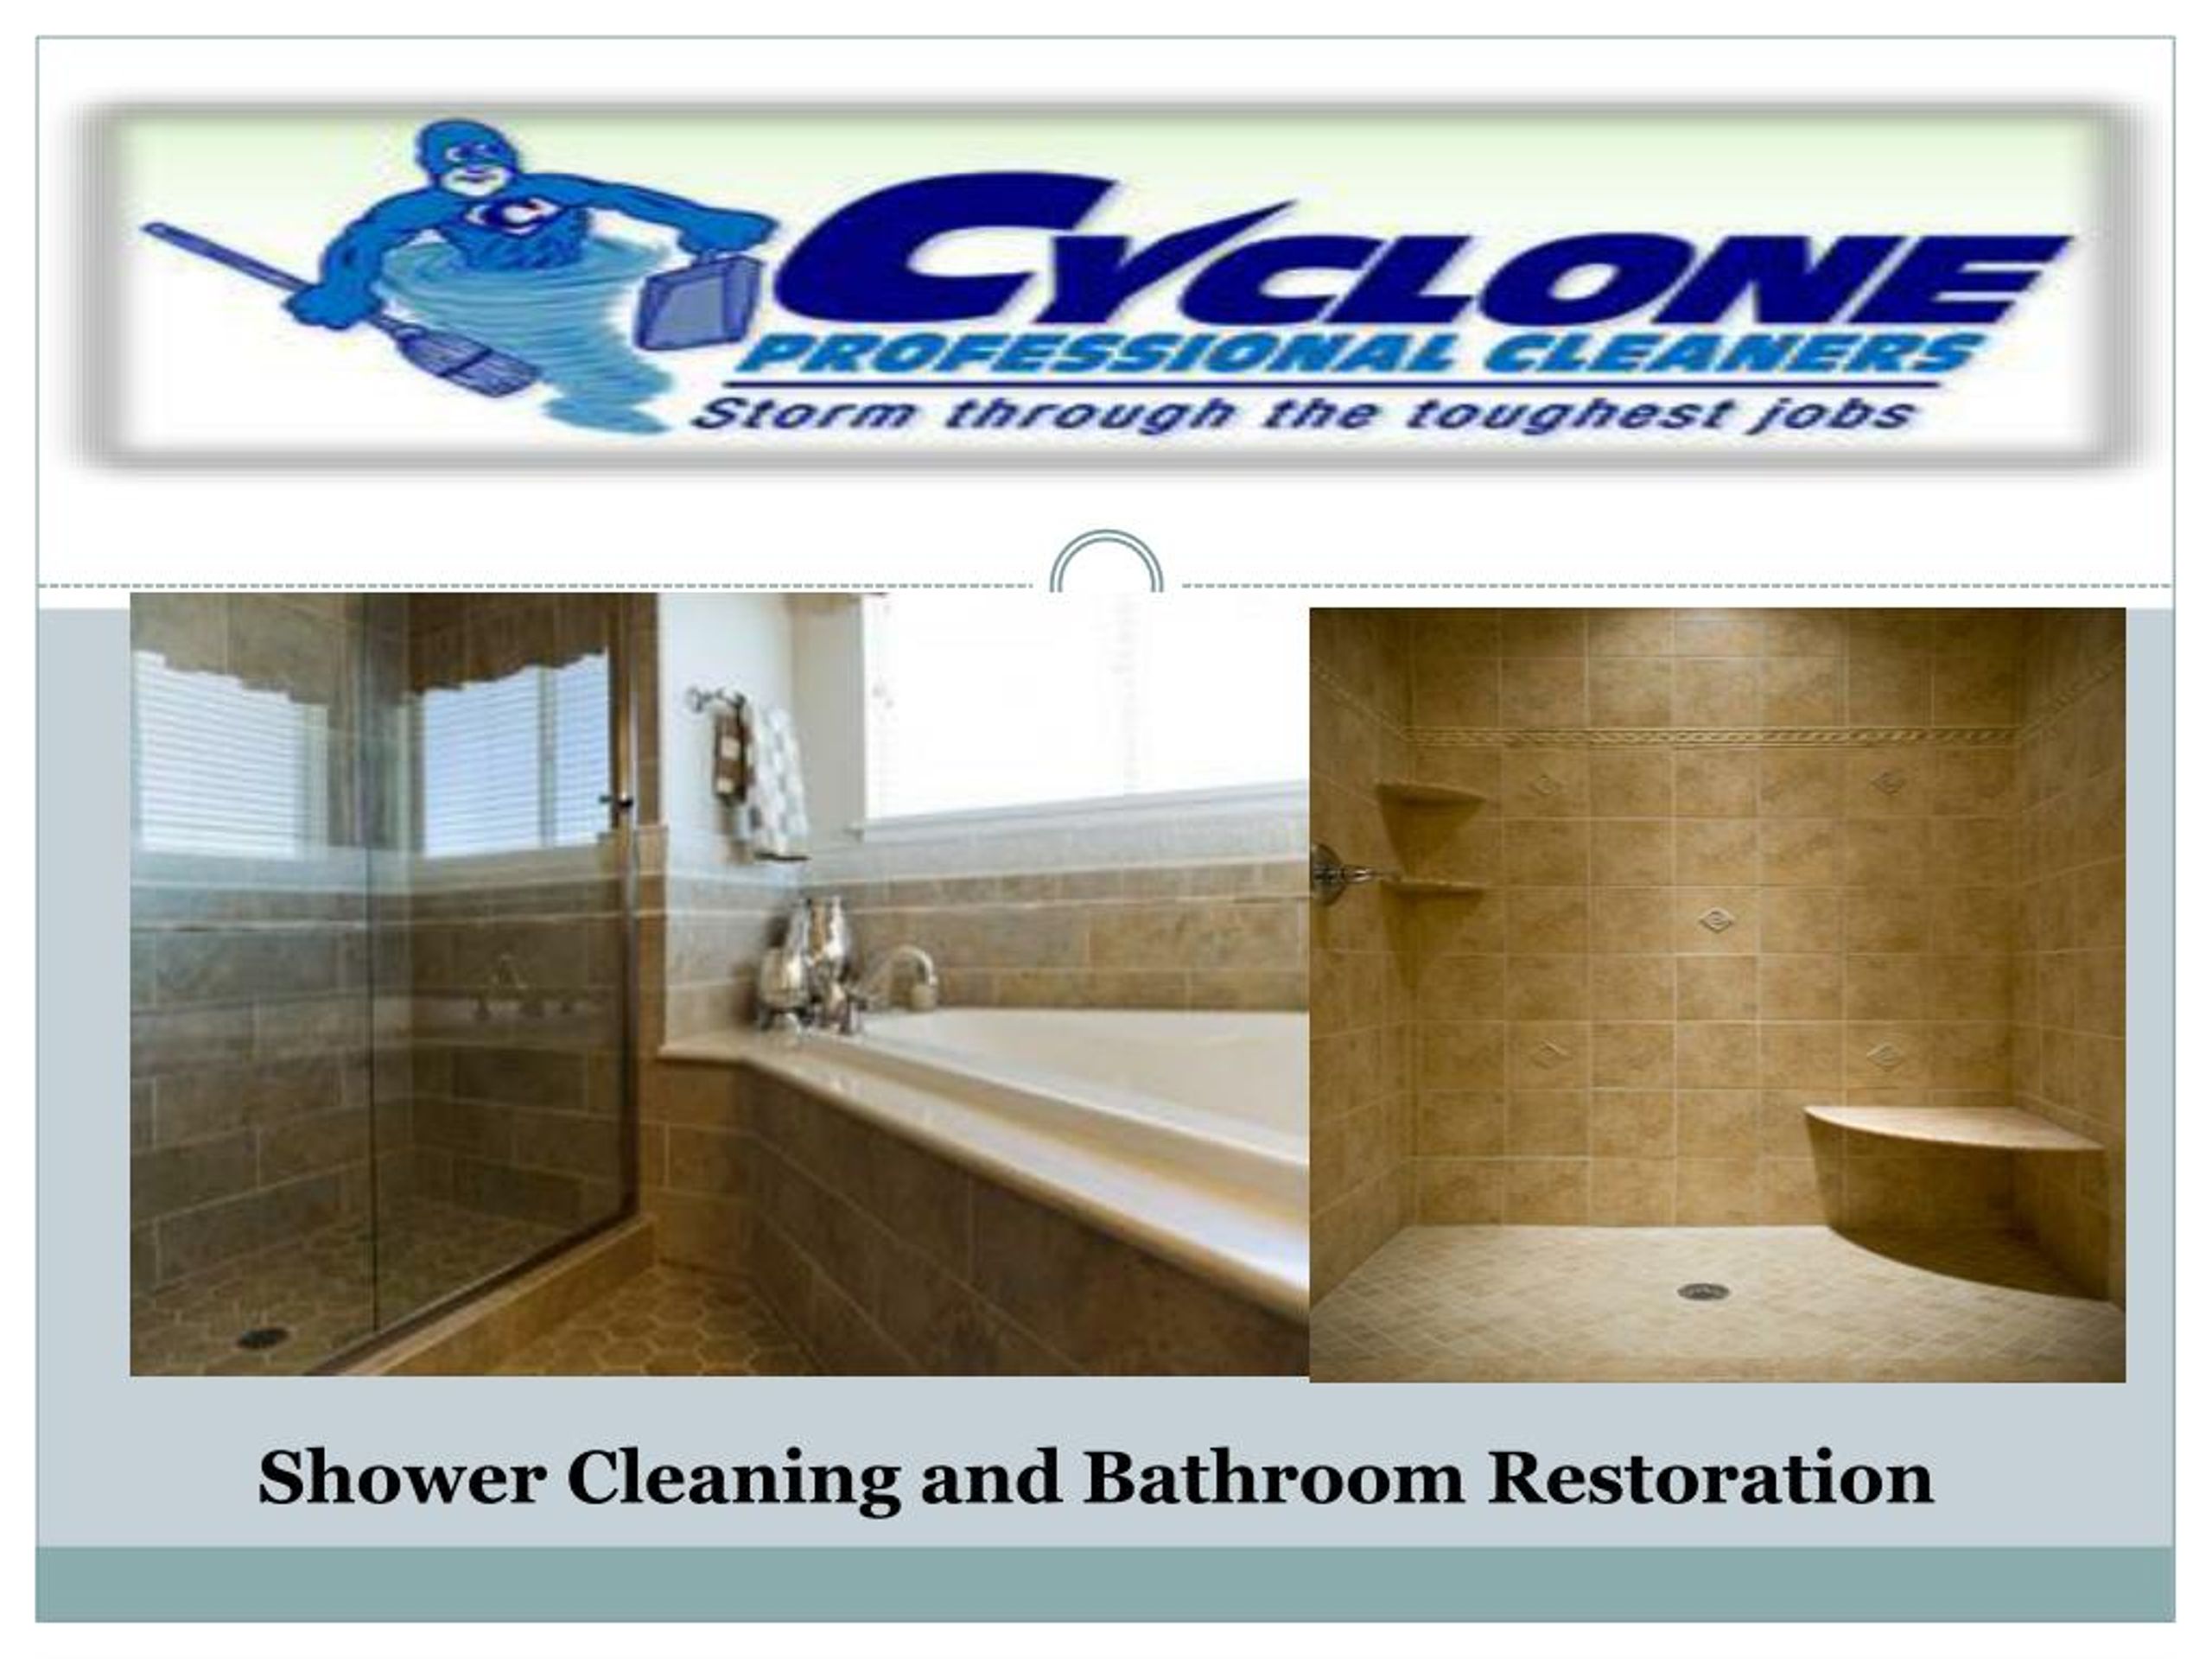 Ppt Shower Cleaning And Bathroom Restoration Powerpoint Presentation Id 7284197